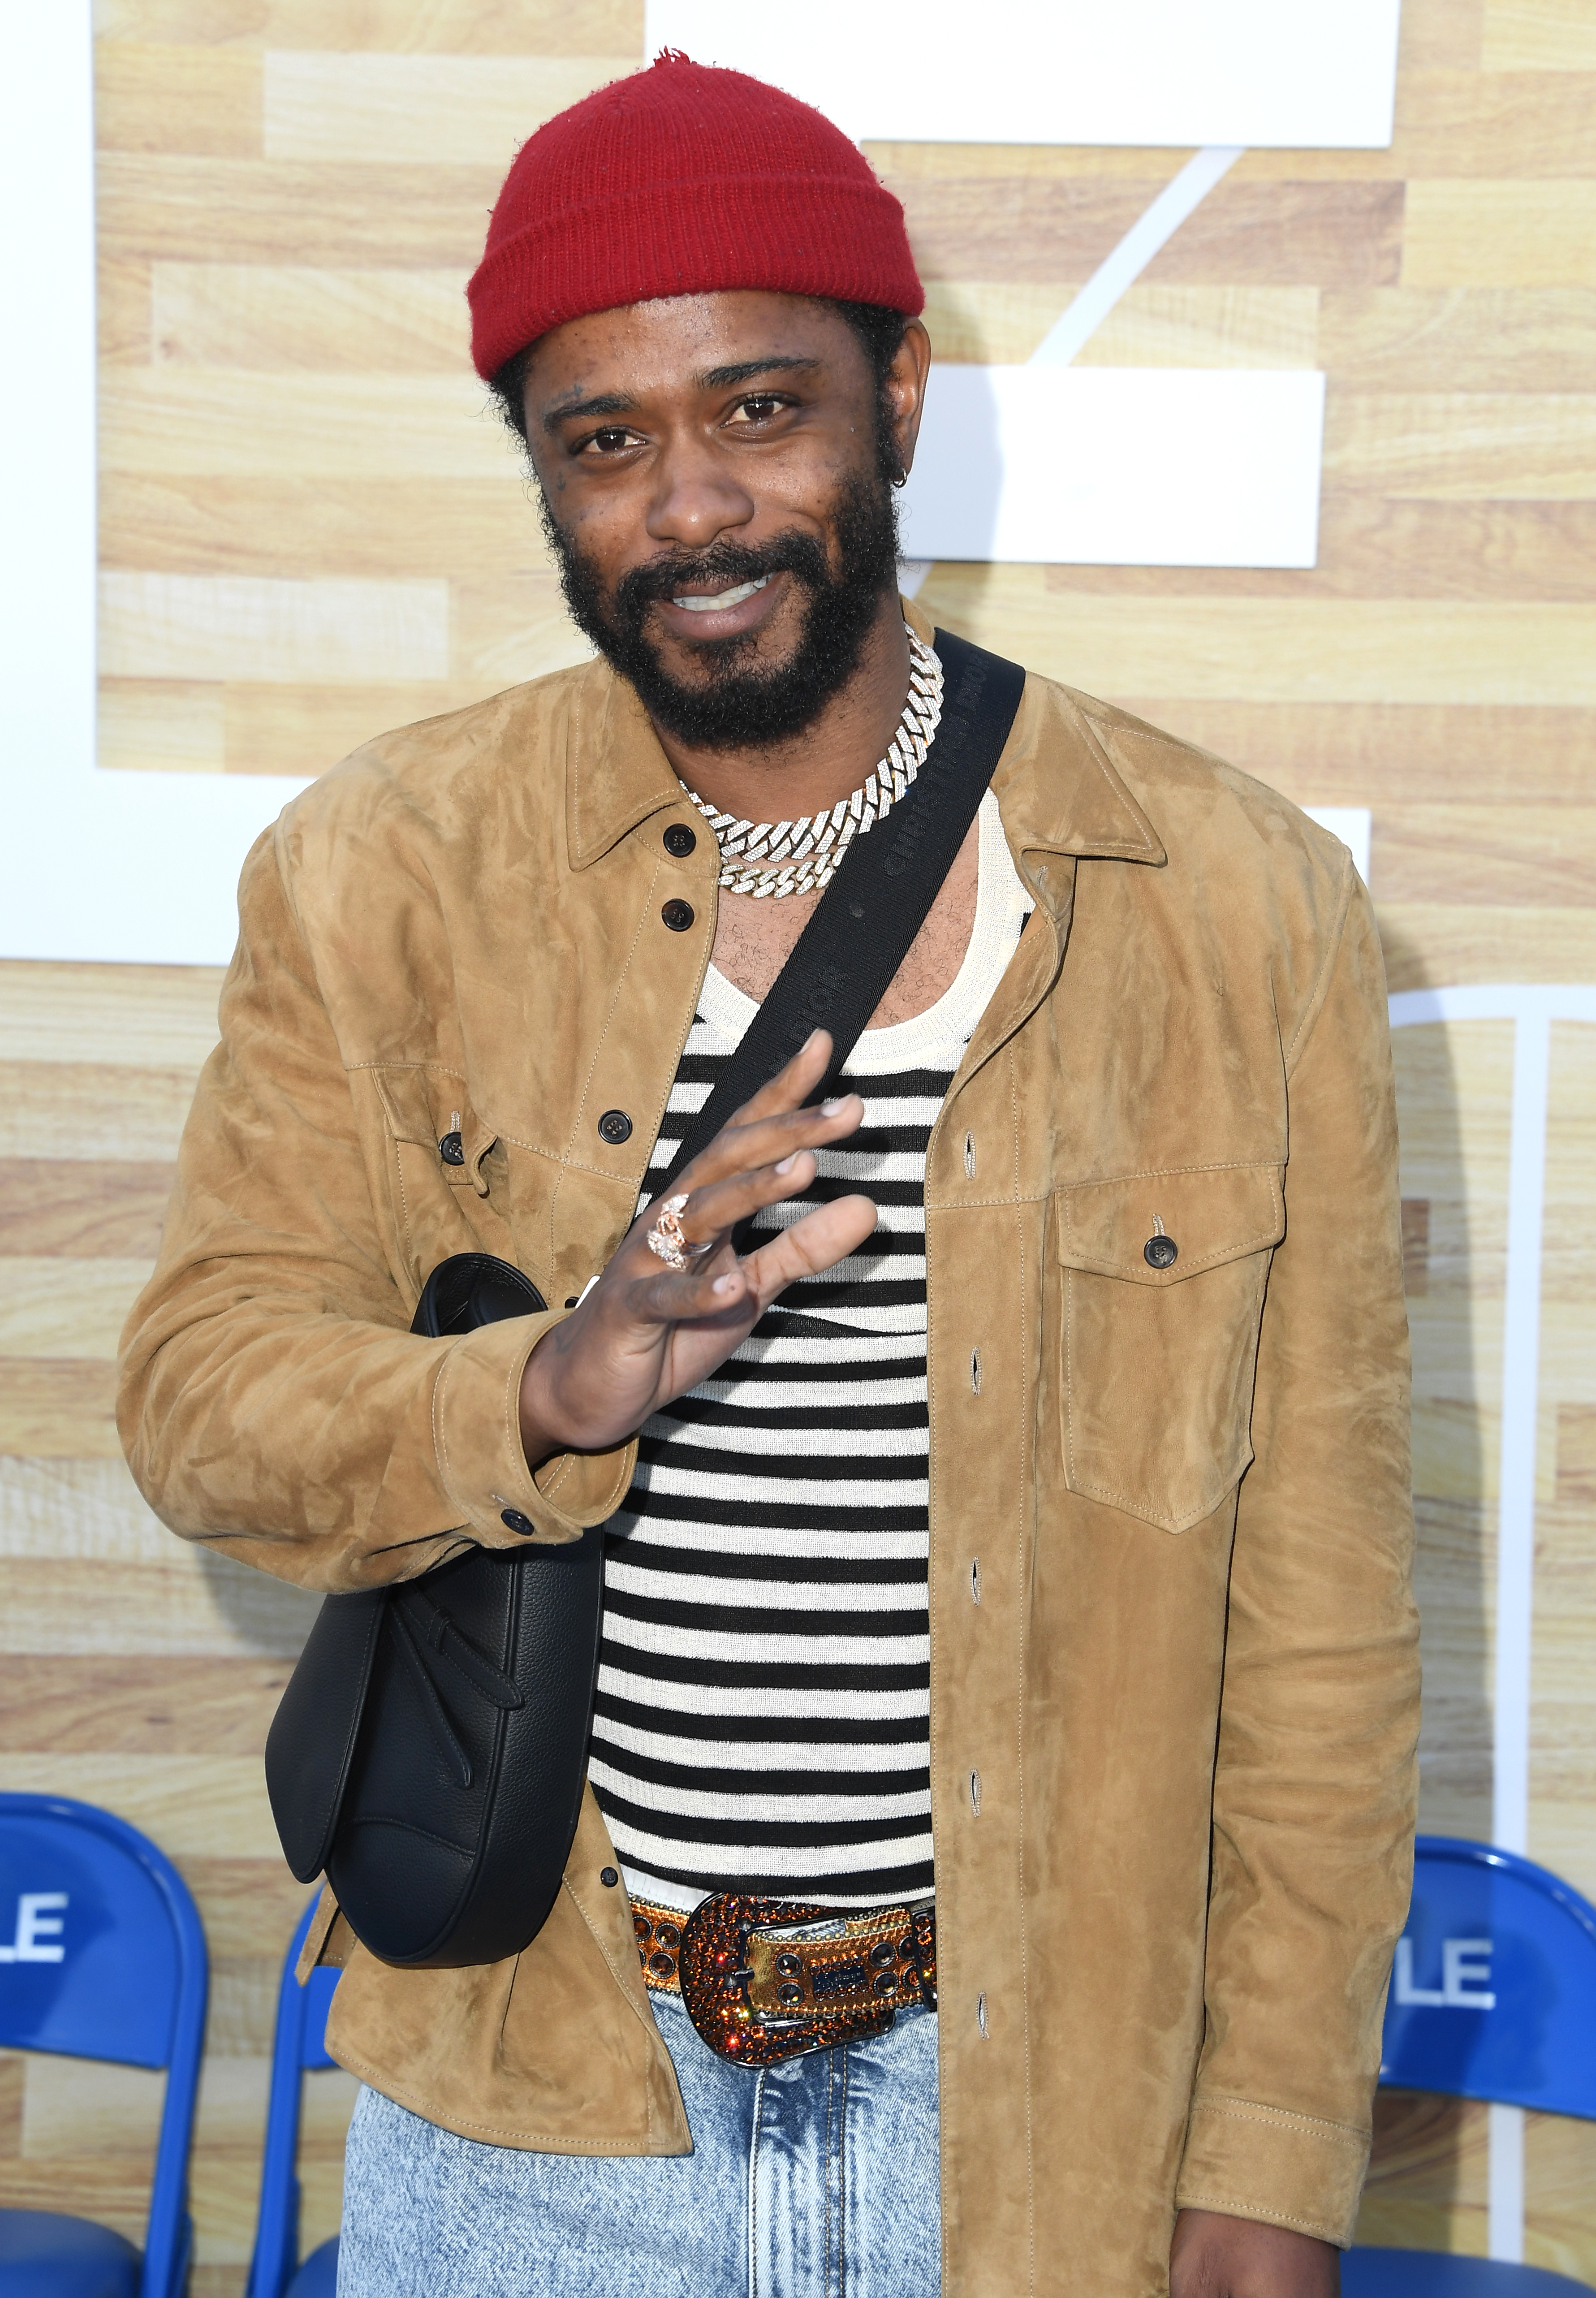 LaKeith Stanfield poses as he arrives at the Los Angeles Premiere Of Netflix's "Hustle" at Regency Village Theatre on June 1, 2022, in Los Angeles, California | Source: Getty Images